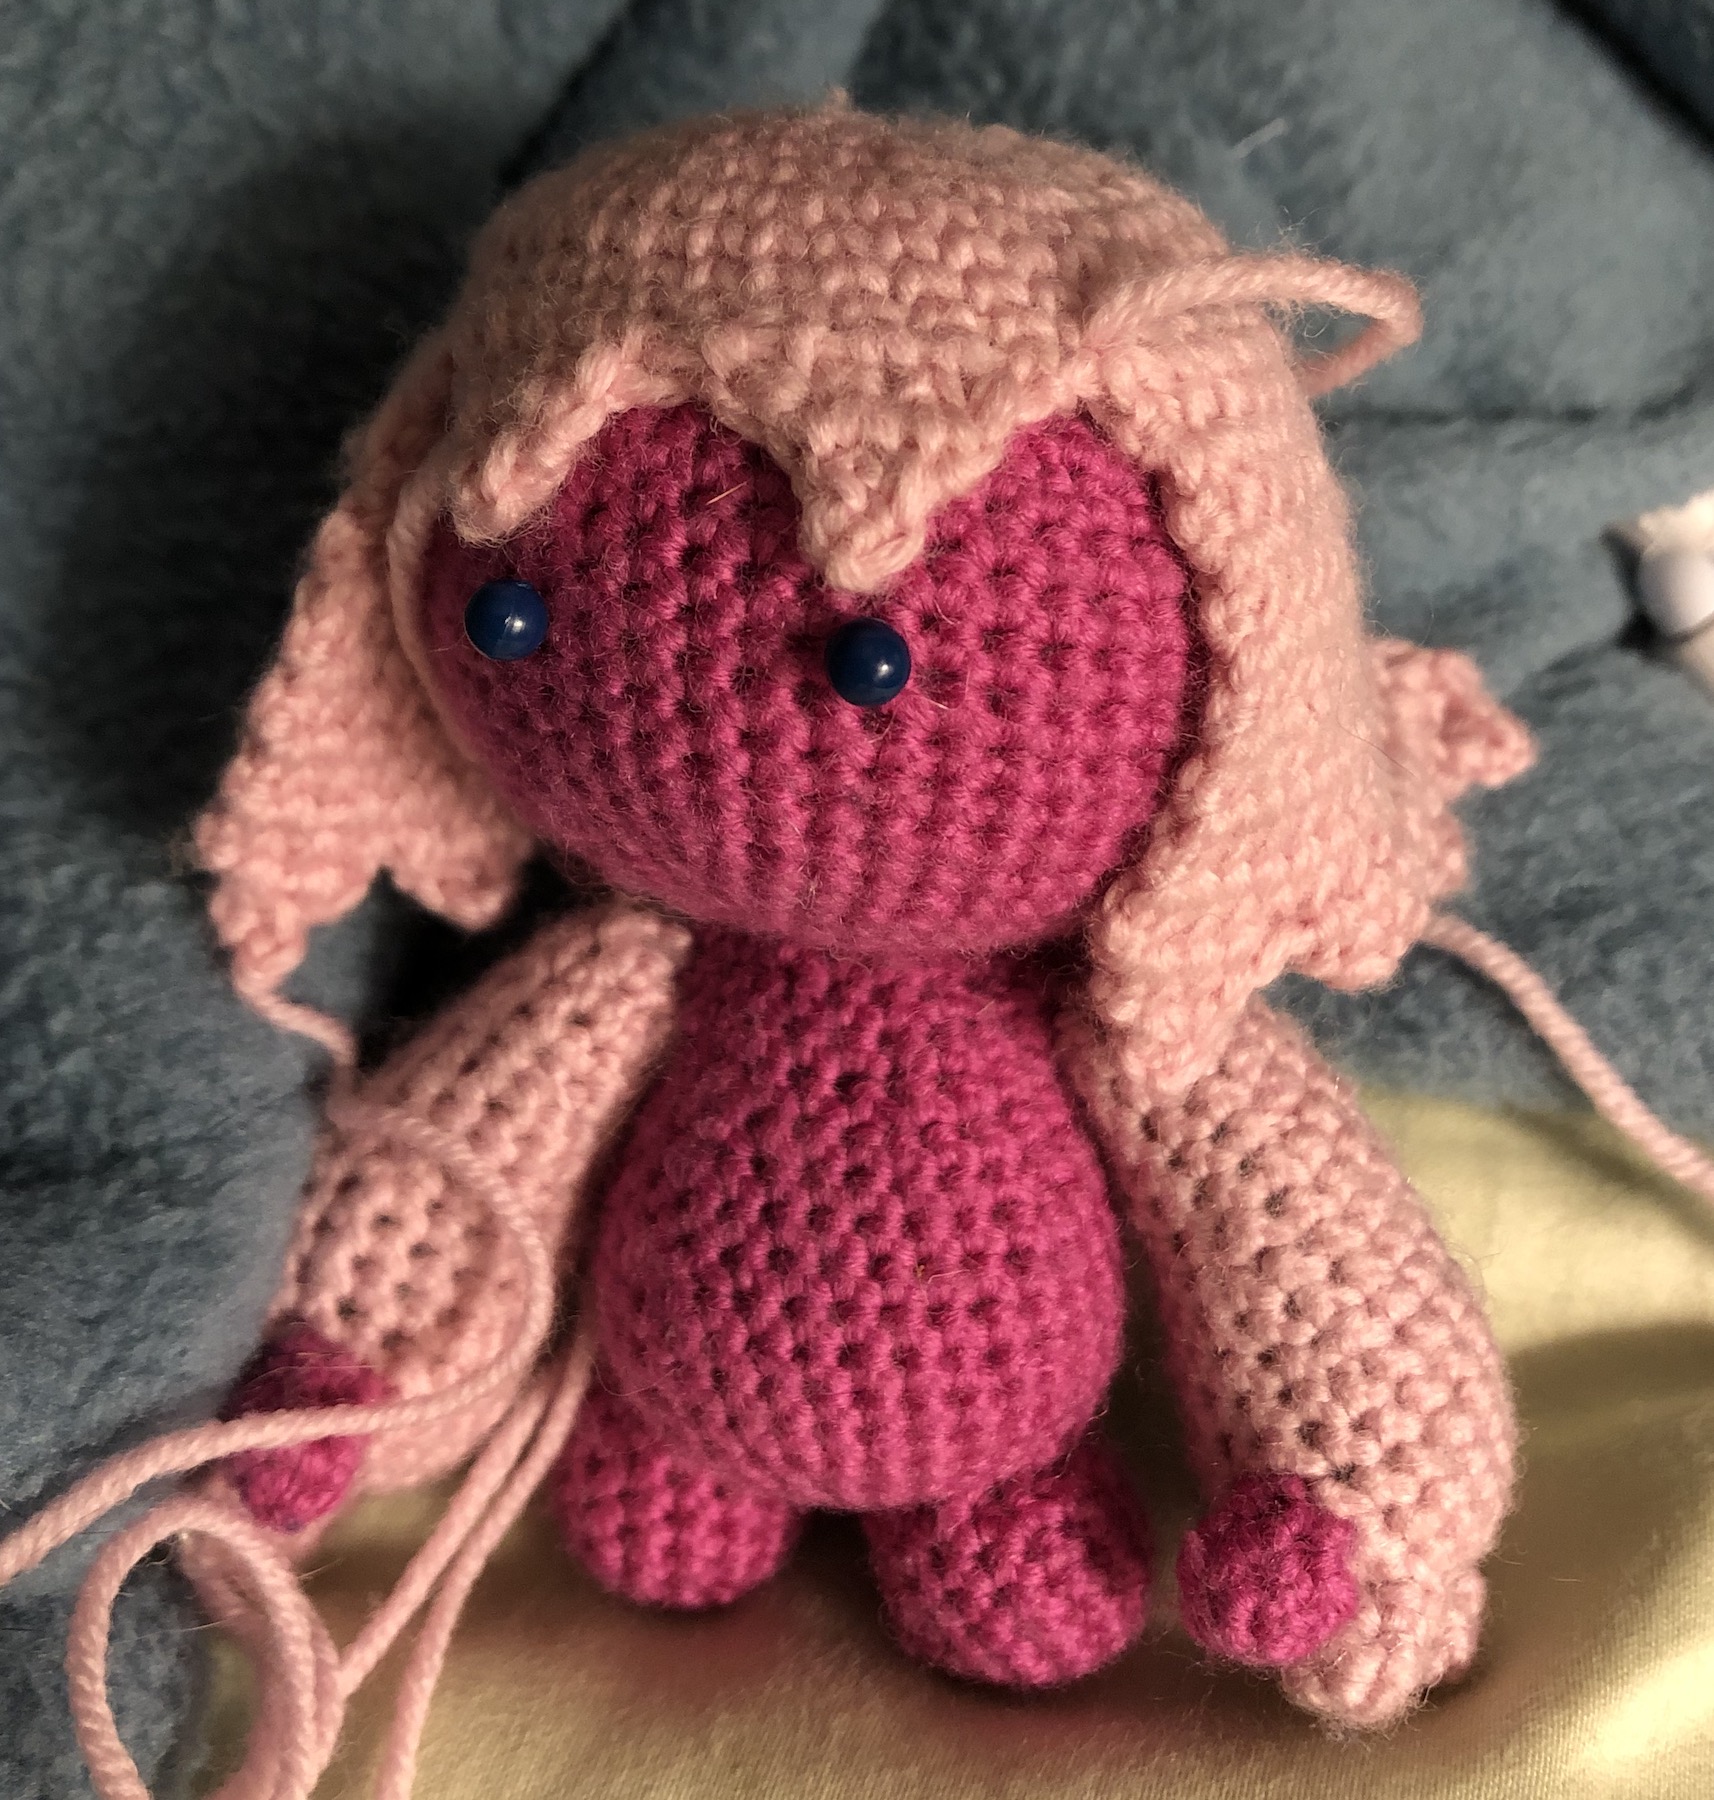 Crocheted head, body, limbs, now with unfinished hair which sits as triangle bangs and down to her shoulders